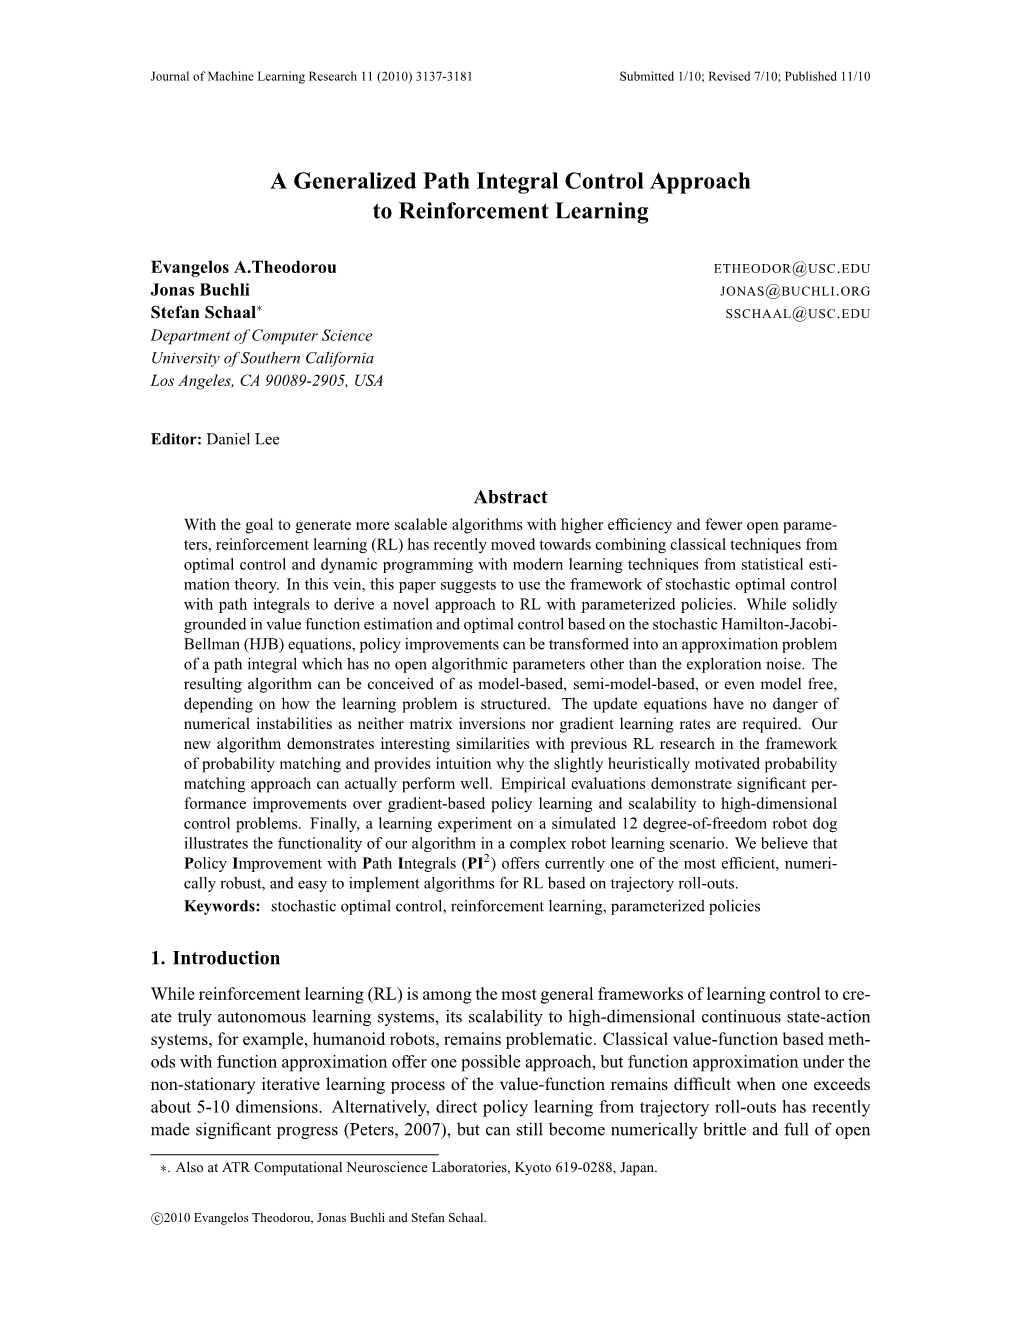 A Generalized Path Integral Control Approach to Reinforcement Learning